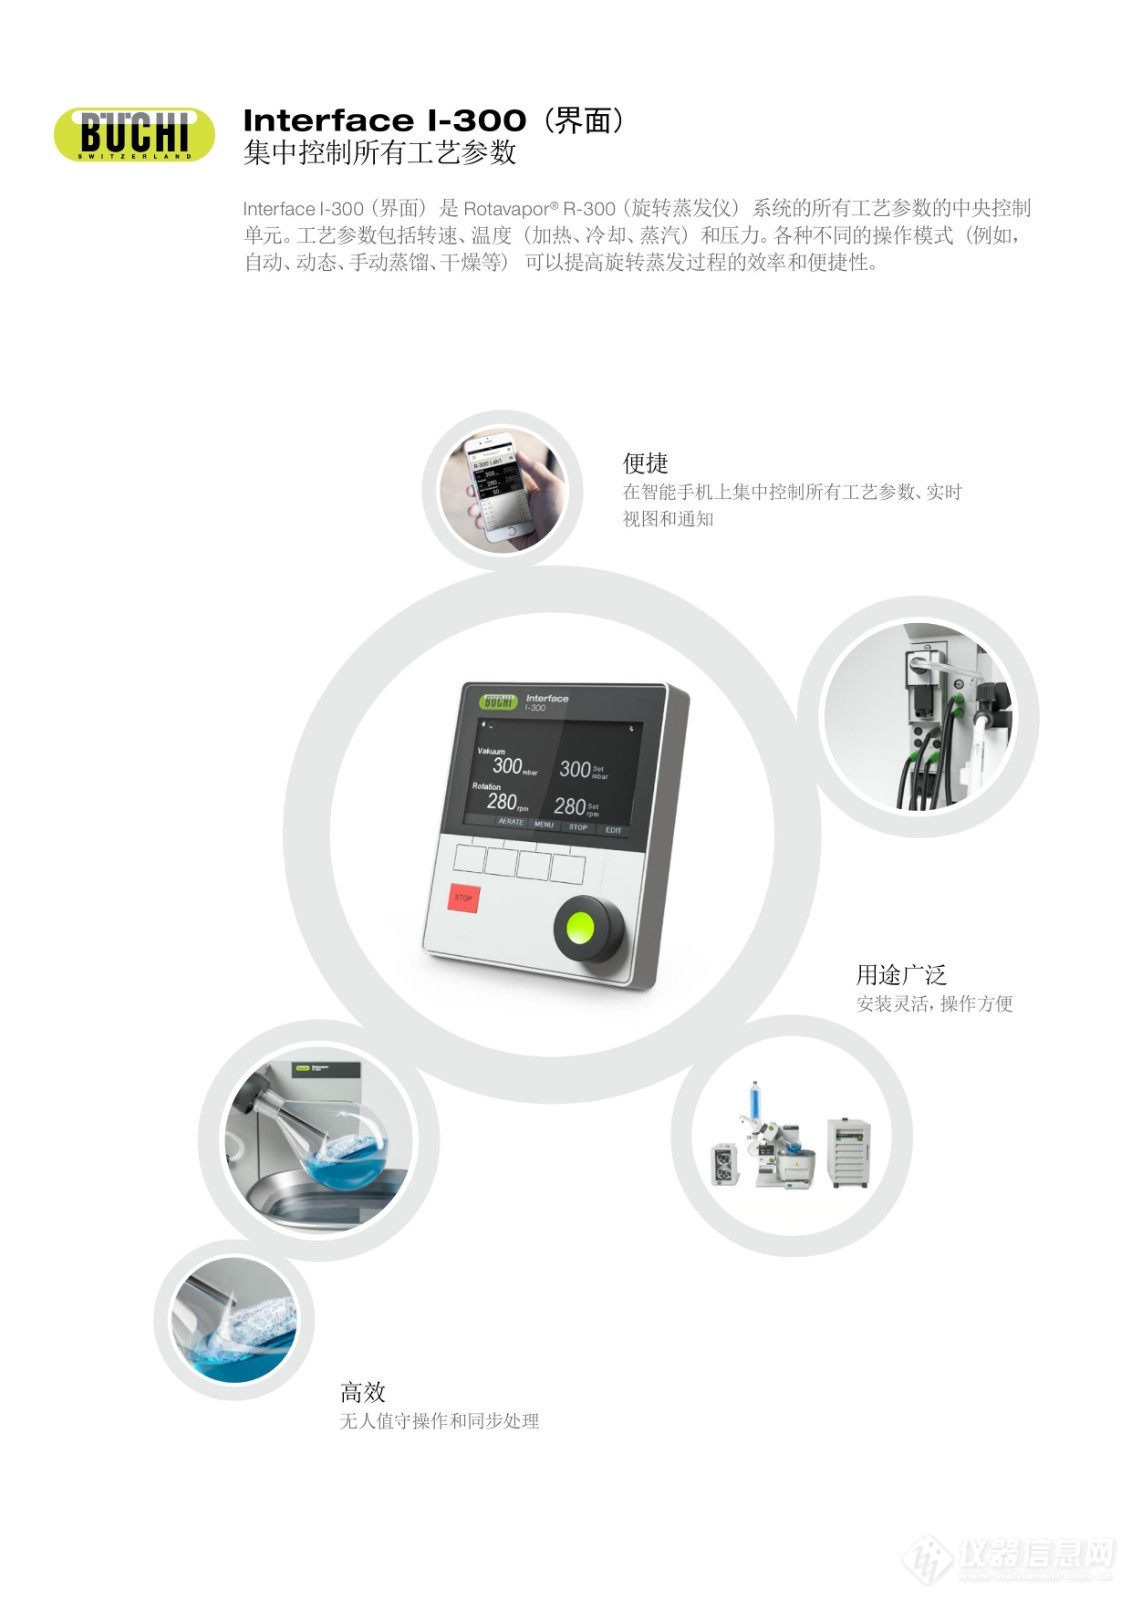 I-300 Product Brochure zh-page-0001.jpg